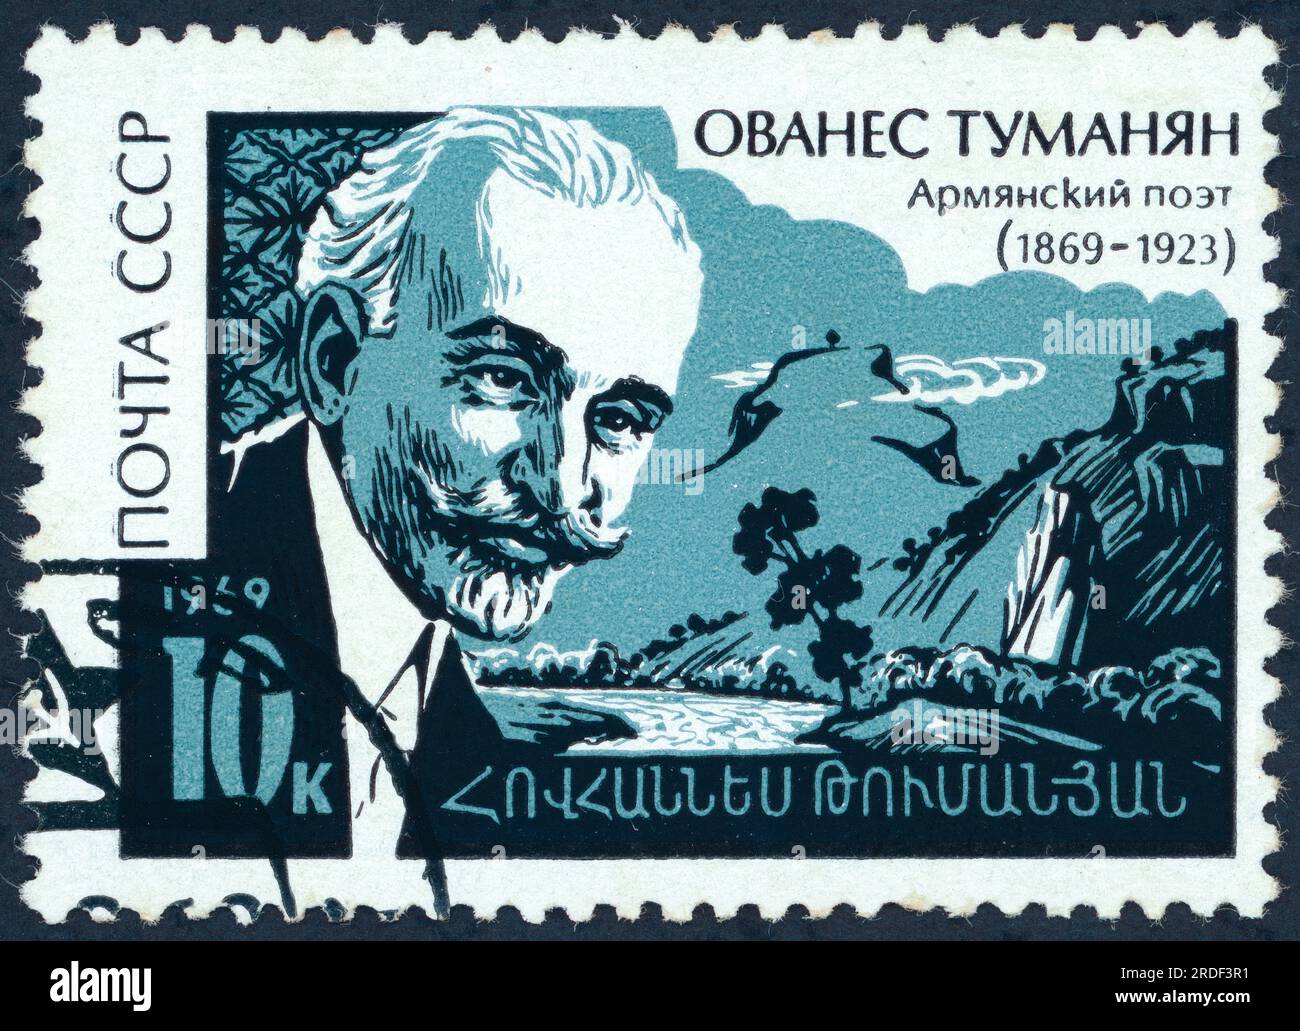 Hovhannes Tumanyan (1869 – 1923). Postage stamp issued in the USSR in 1969 – on the 100th anniversary of Tumanyan's birth. Tumanyan was an Armenian poet, writer, translator, and literary and public activist. He is the national poet of Armenia. Stock Photo